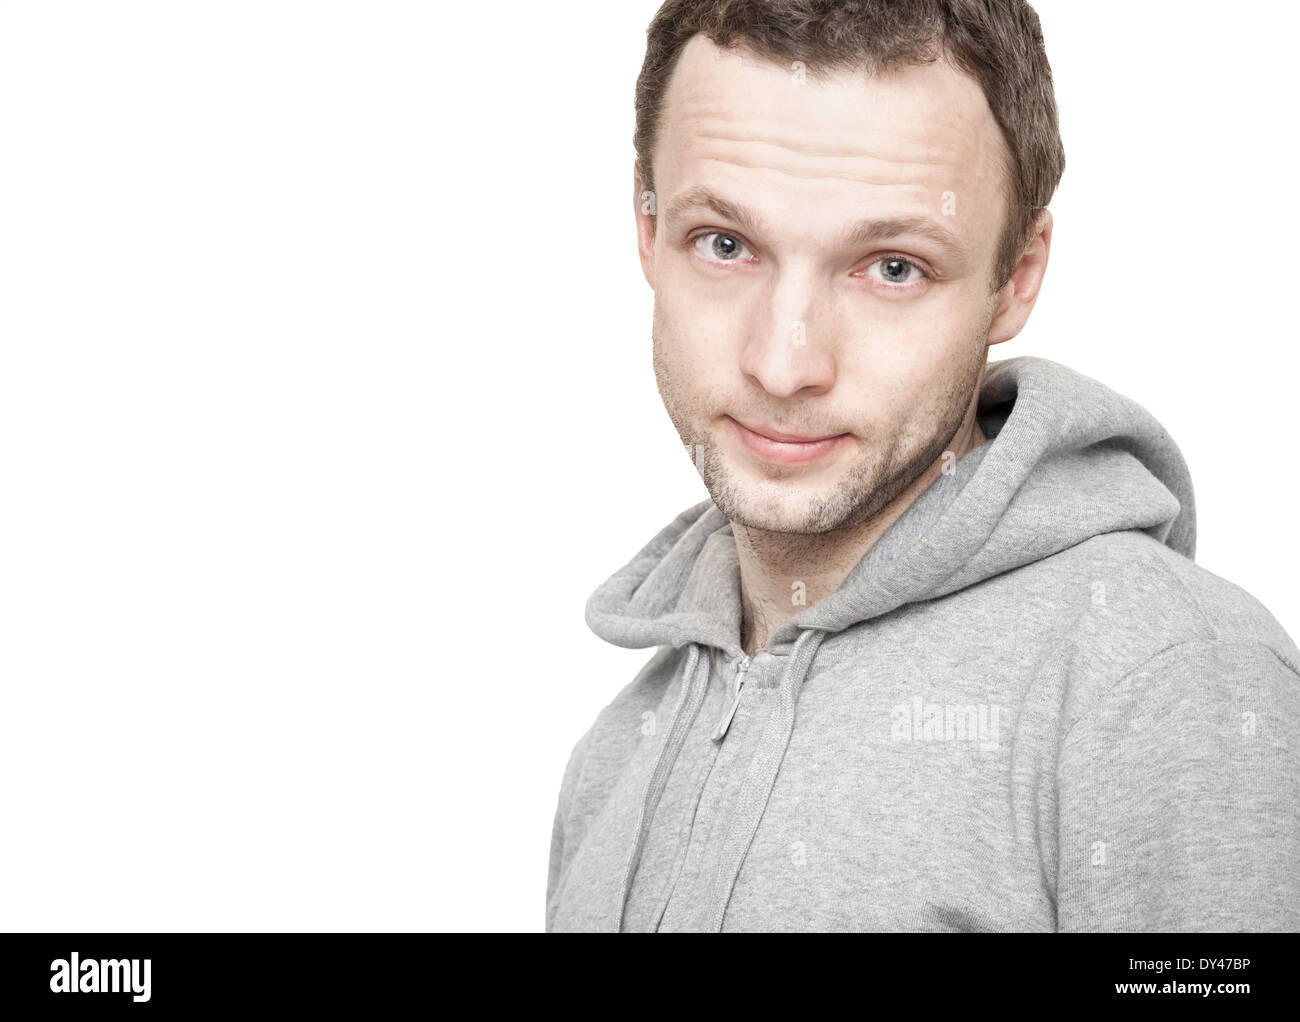 Young Caucasian man in gray sports jacket with hood. Studio portrait isolated on white Stock Photo